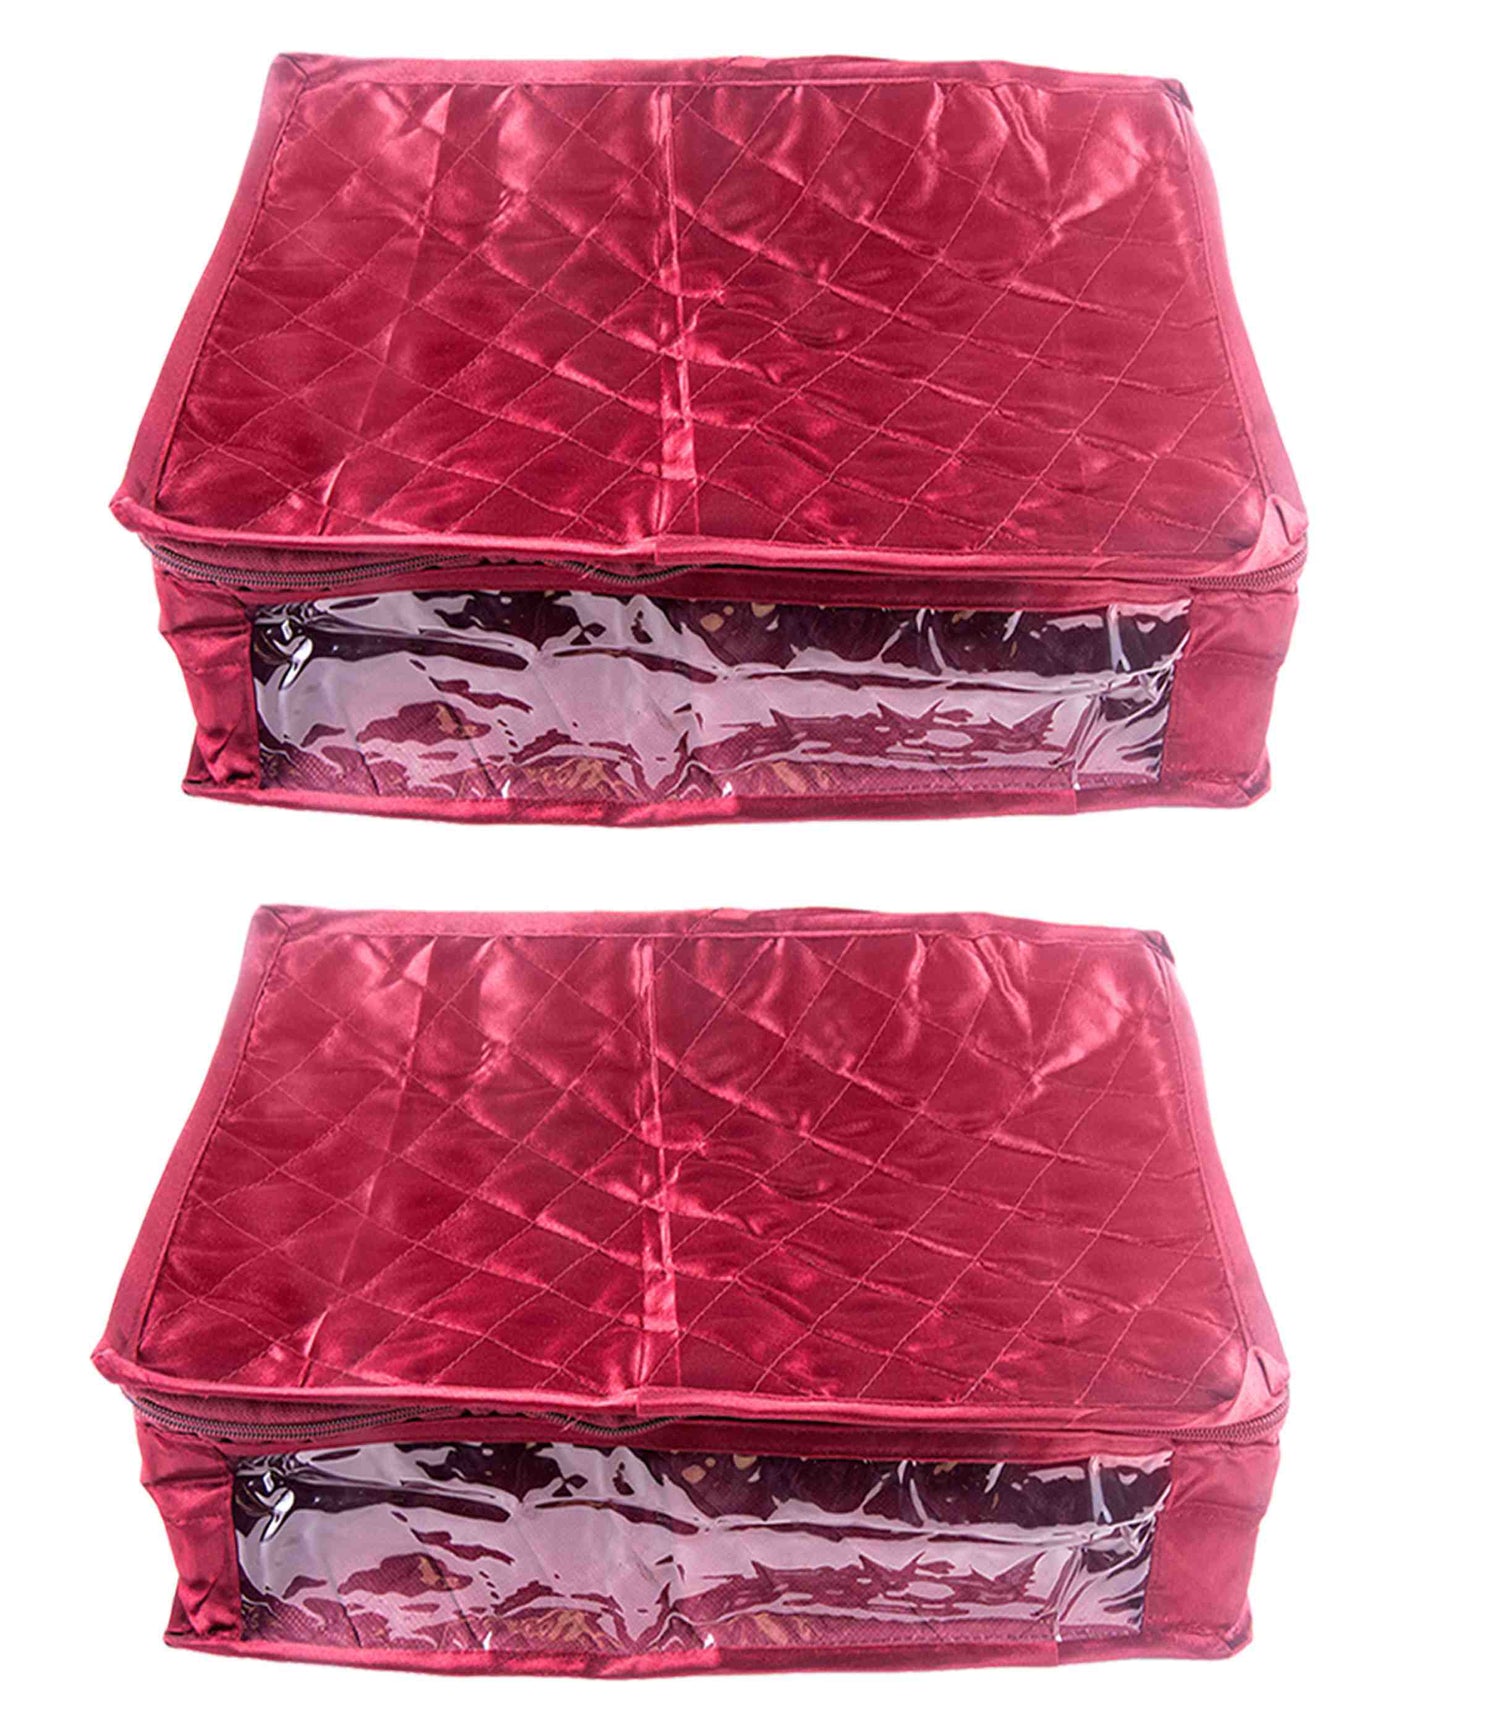 4 inch height peticoat cover | wardrobe storage pack of 2 pcs. - FAVISM